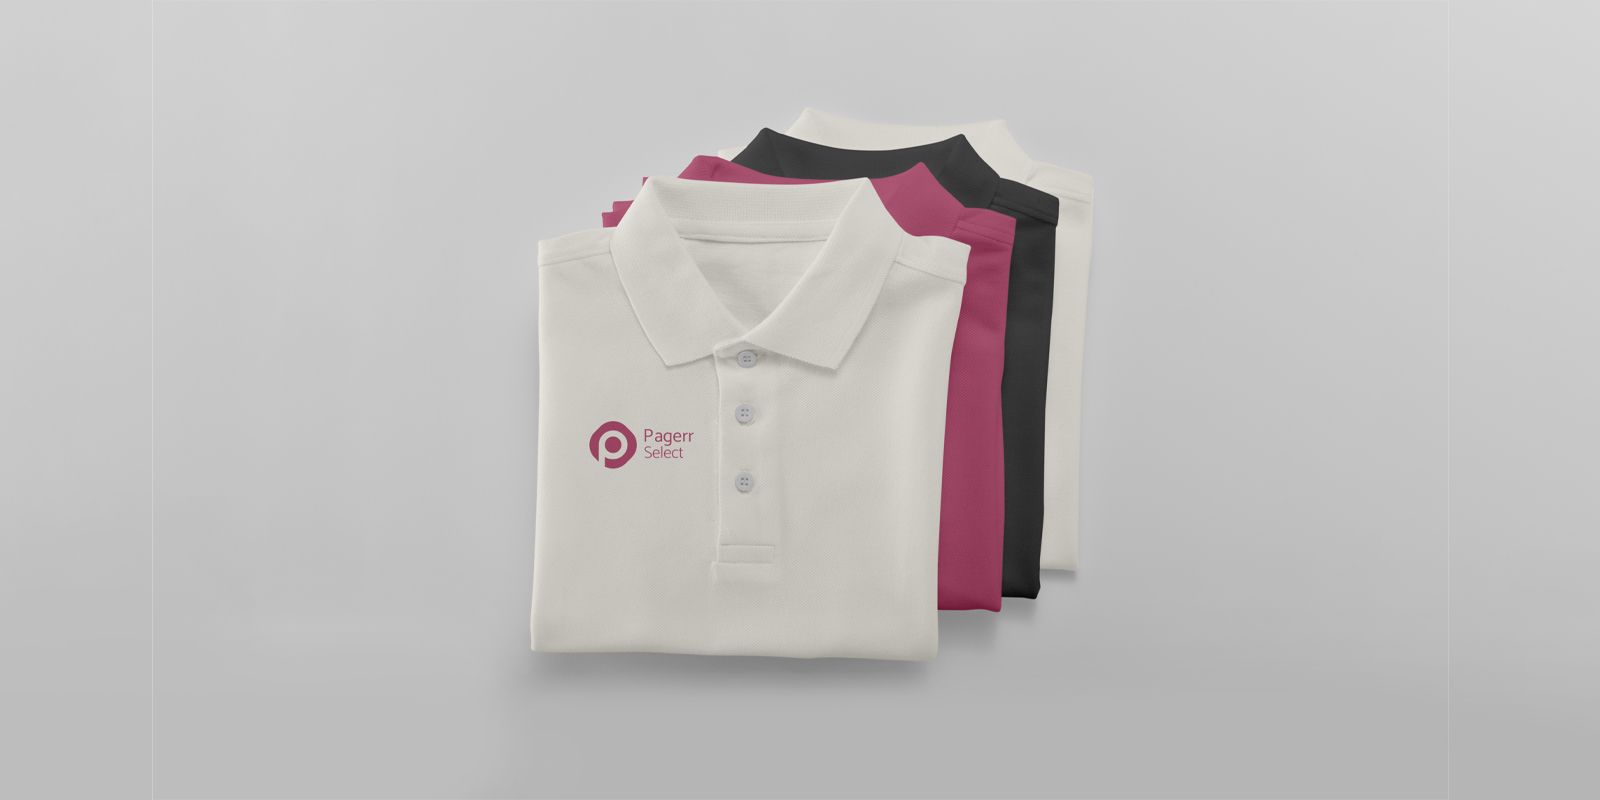 Polo shirts in Perth - Print with Pagerr